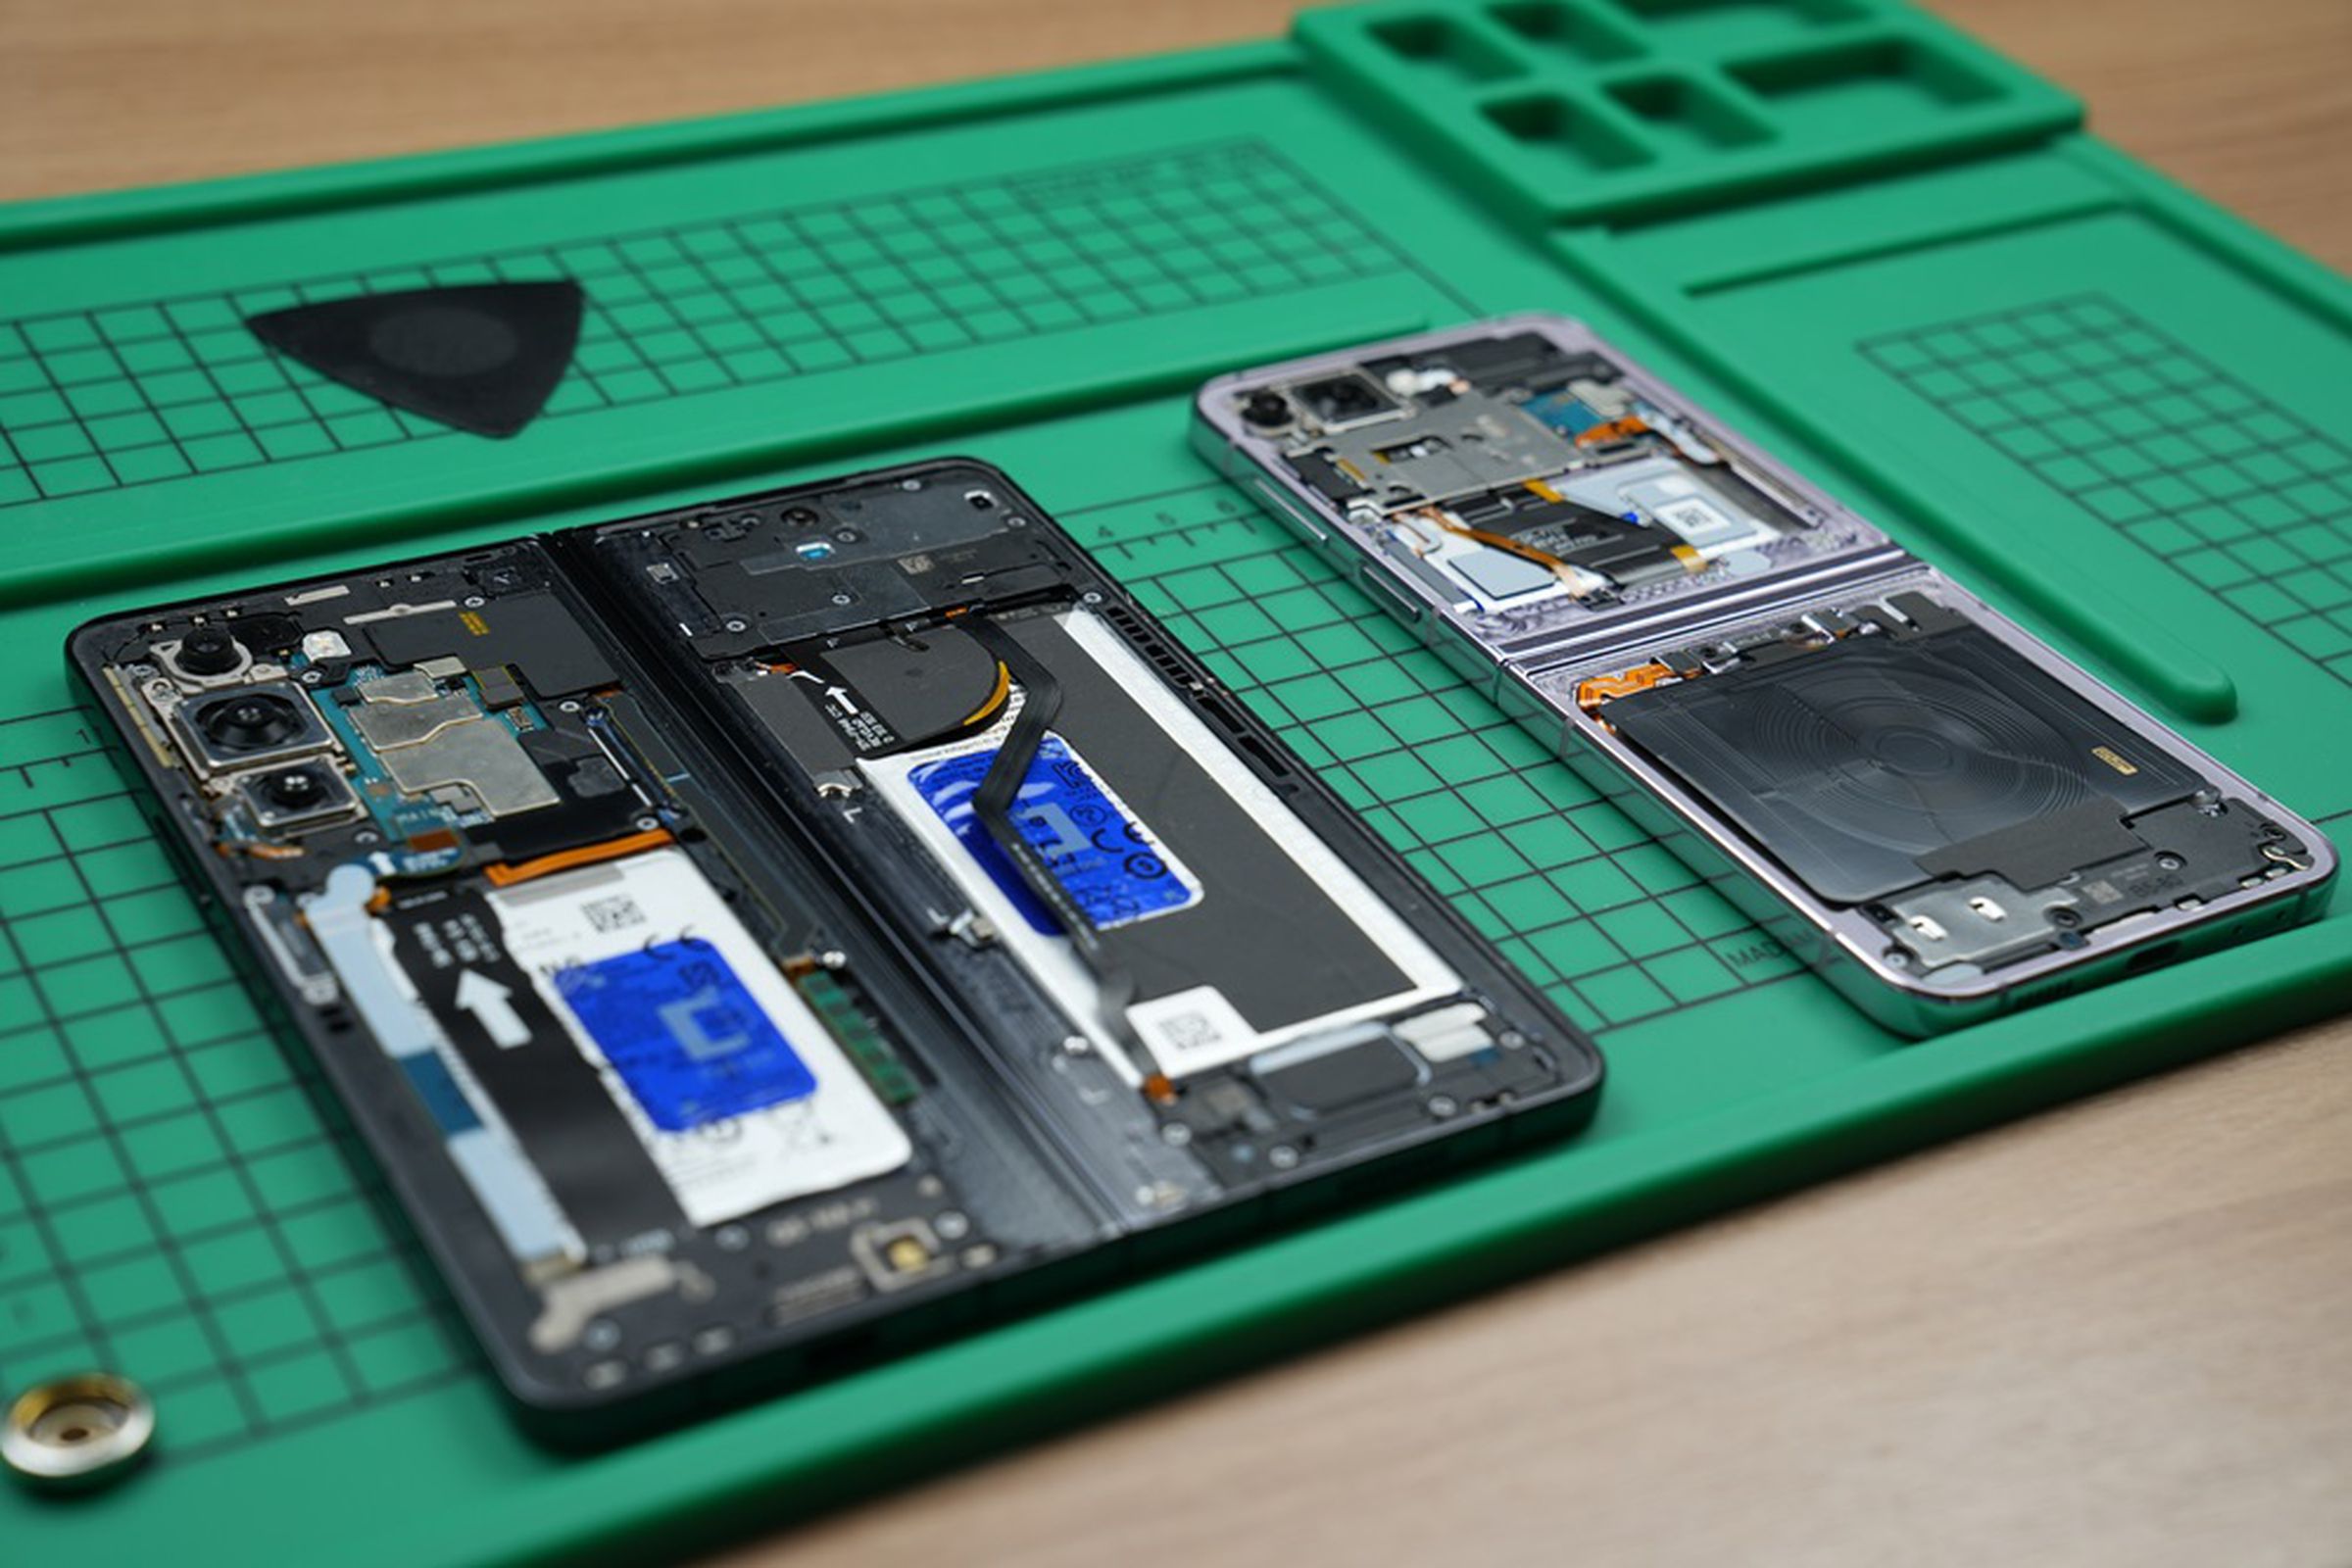 The insides of two smart phones on a green mat.